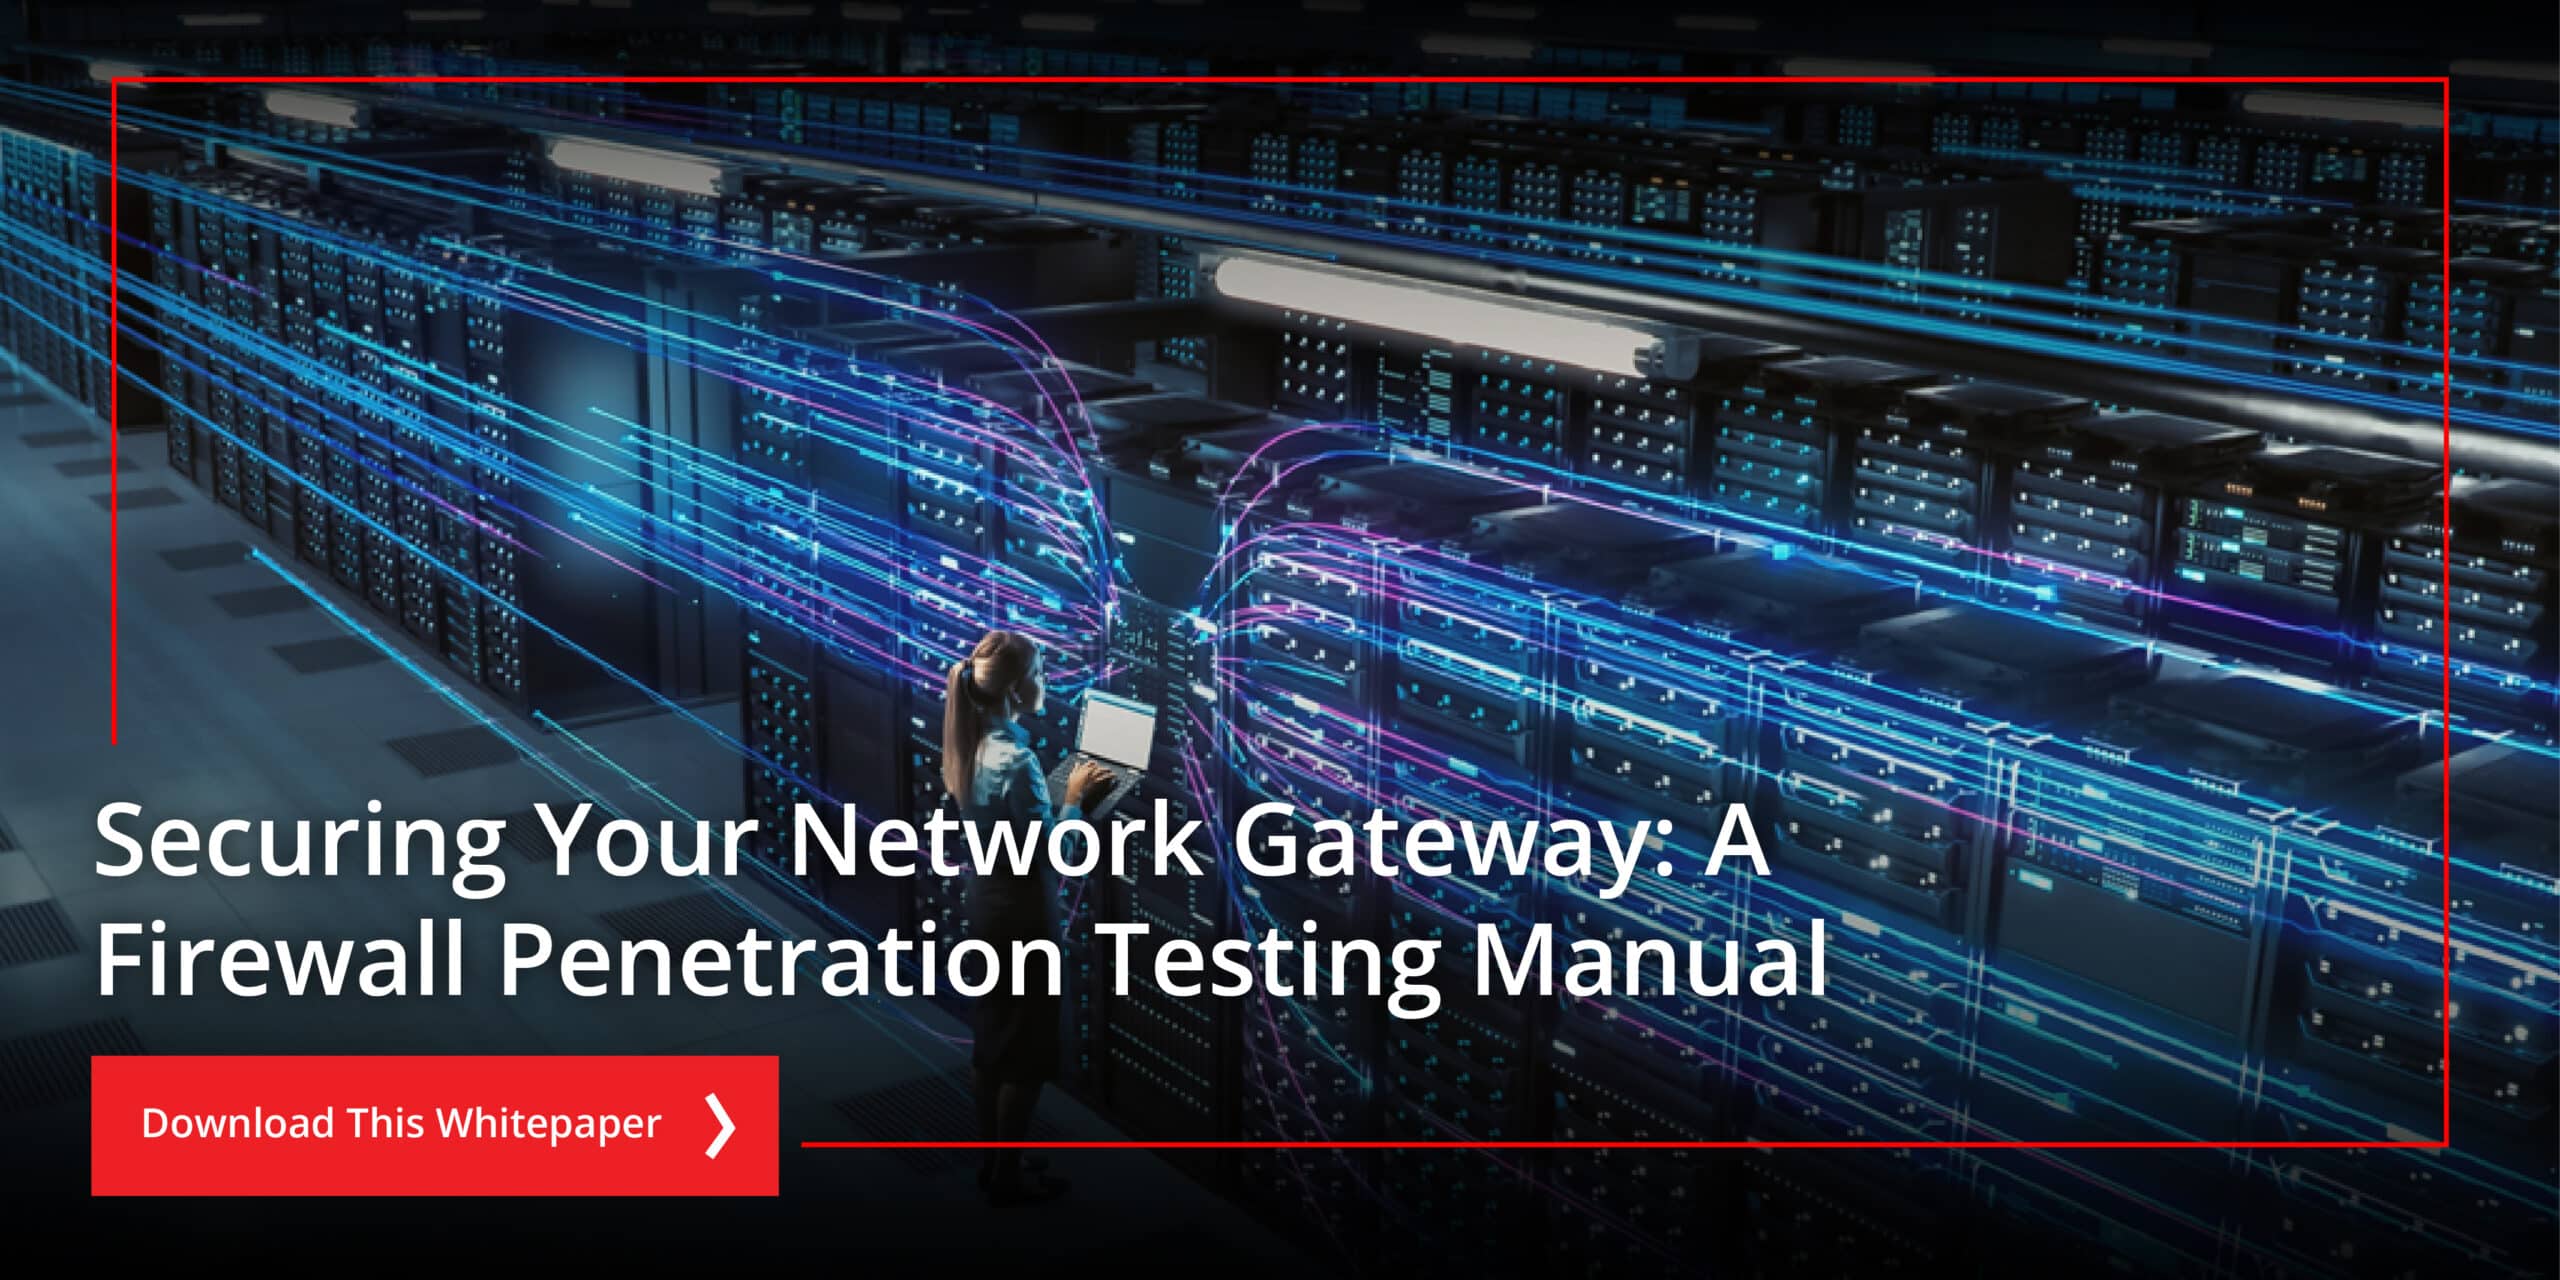 A Complete Guide to Firewall Penetration Testing